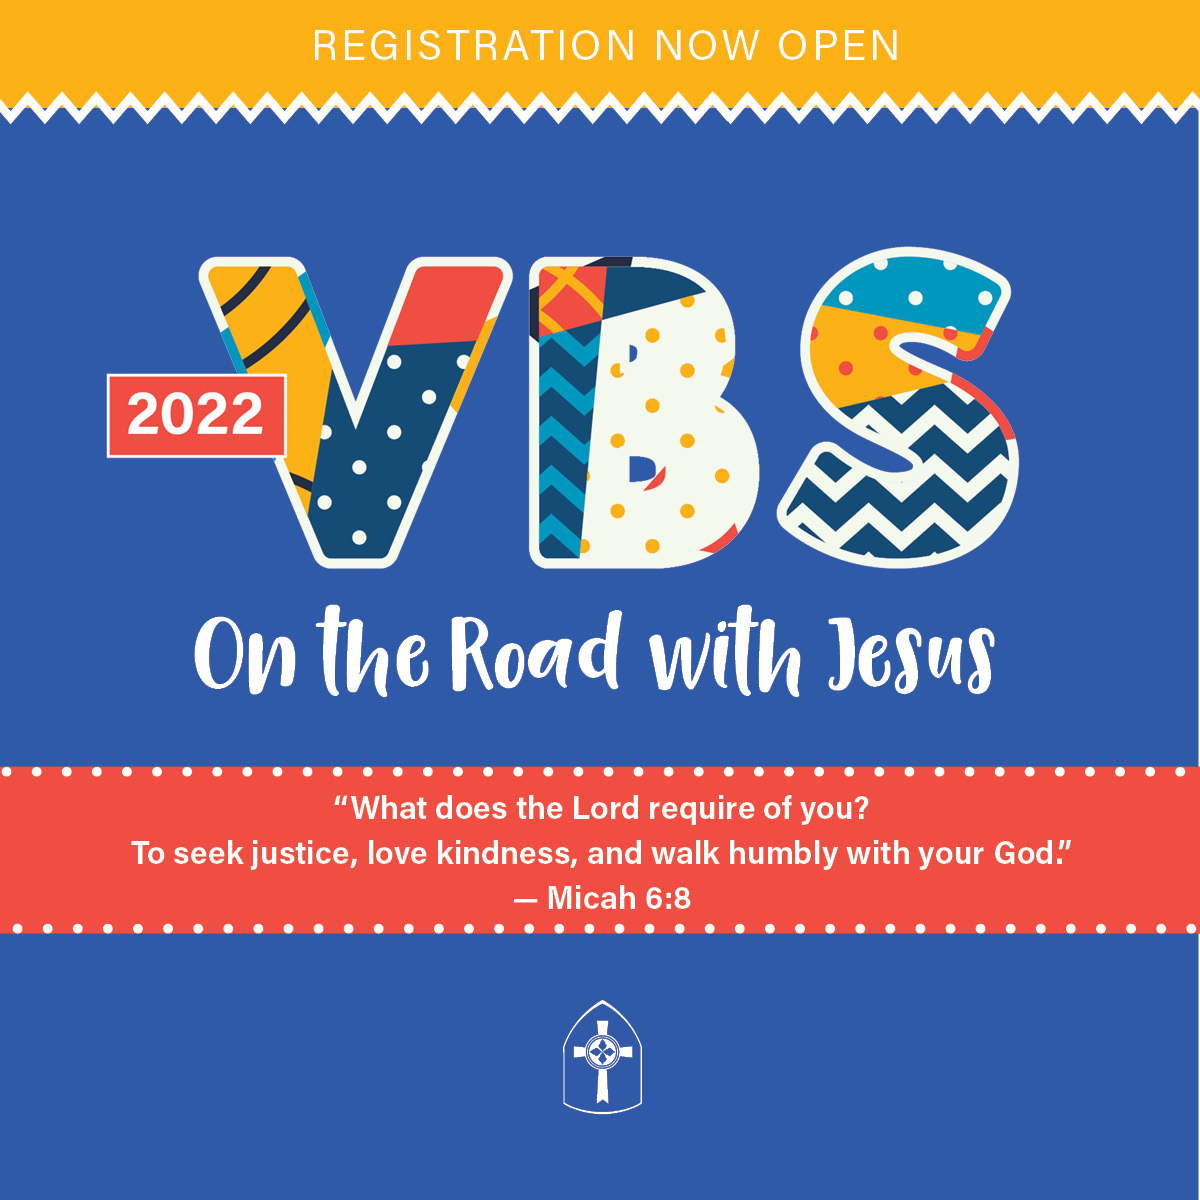 Vacation Bible School 2022
June 27 - July 1
9 AM to Noon
Ages 4 (by 9/1/22) to completed 5th Grade

Registration is open through June 5th!


 
